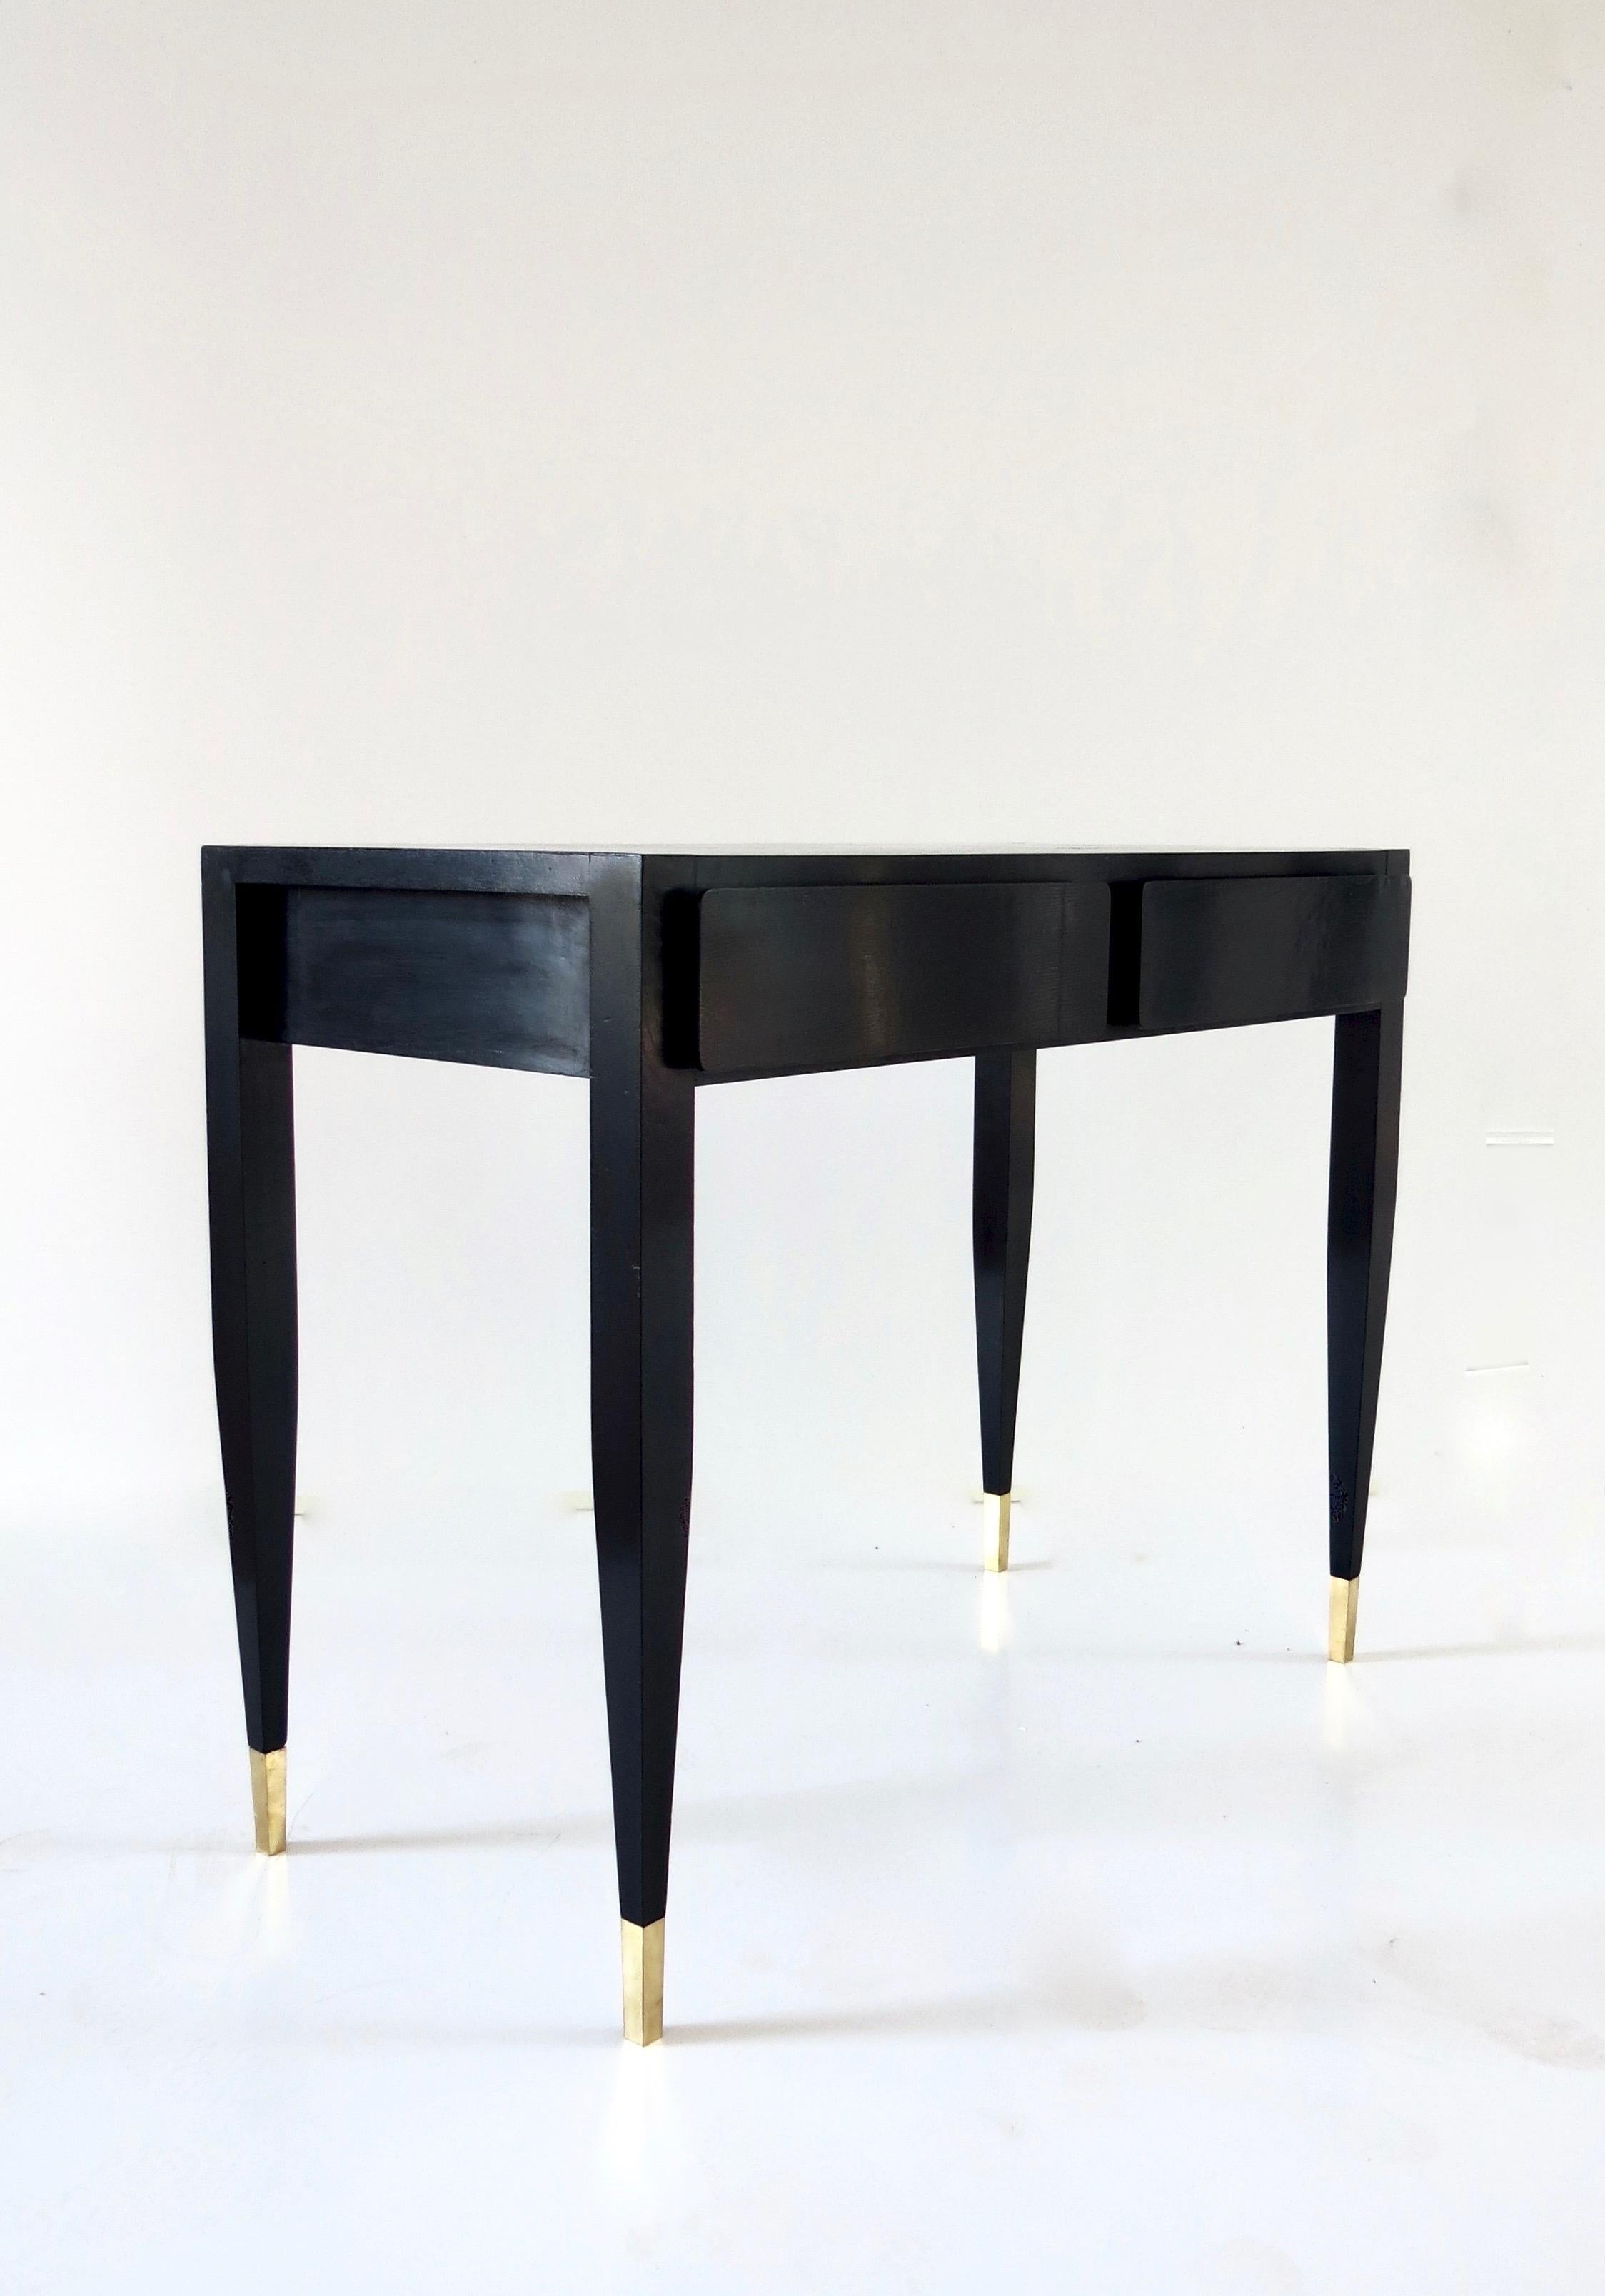 Elegant and rare Gio Ponti black toilette, vanity table - dressing table
produced by Giordano Chiesa for the Hotel Parco Dei Principi in Rome, 1965

Black lacquered Italian ash, brass, two drawers
Measures: H 75cm, 95 x 47 cm; top: 45 x 95